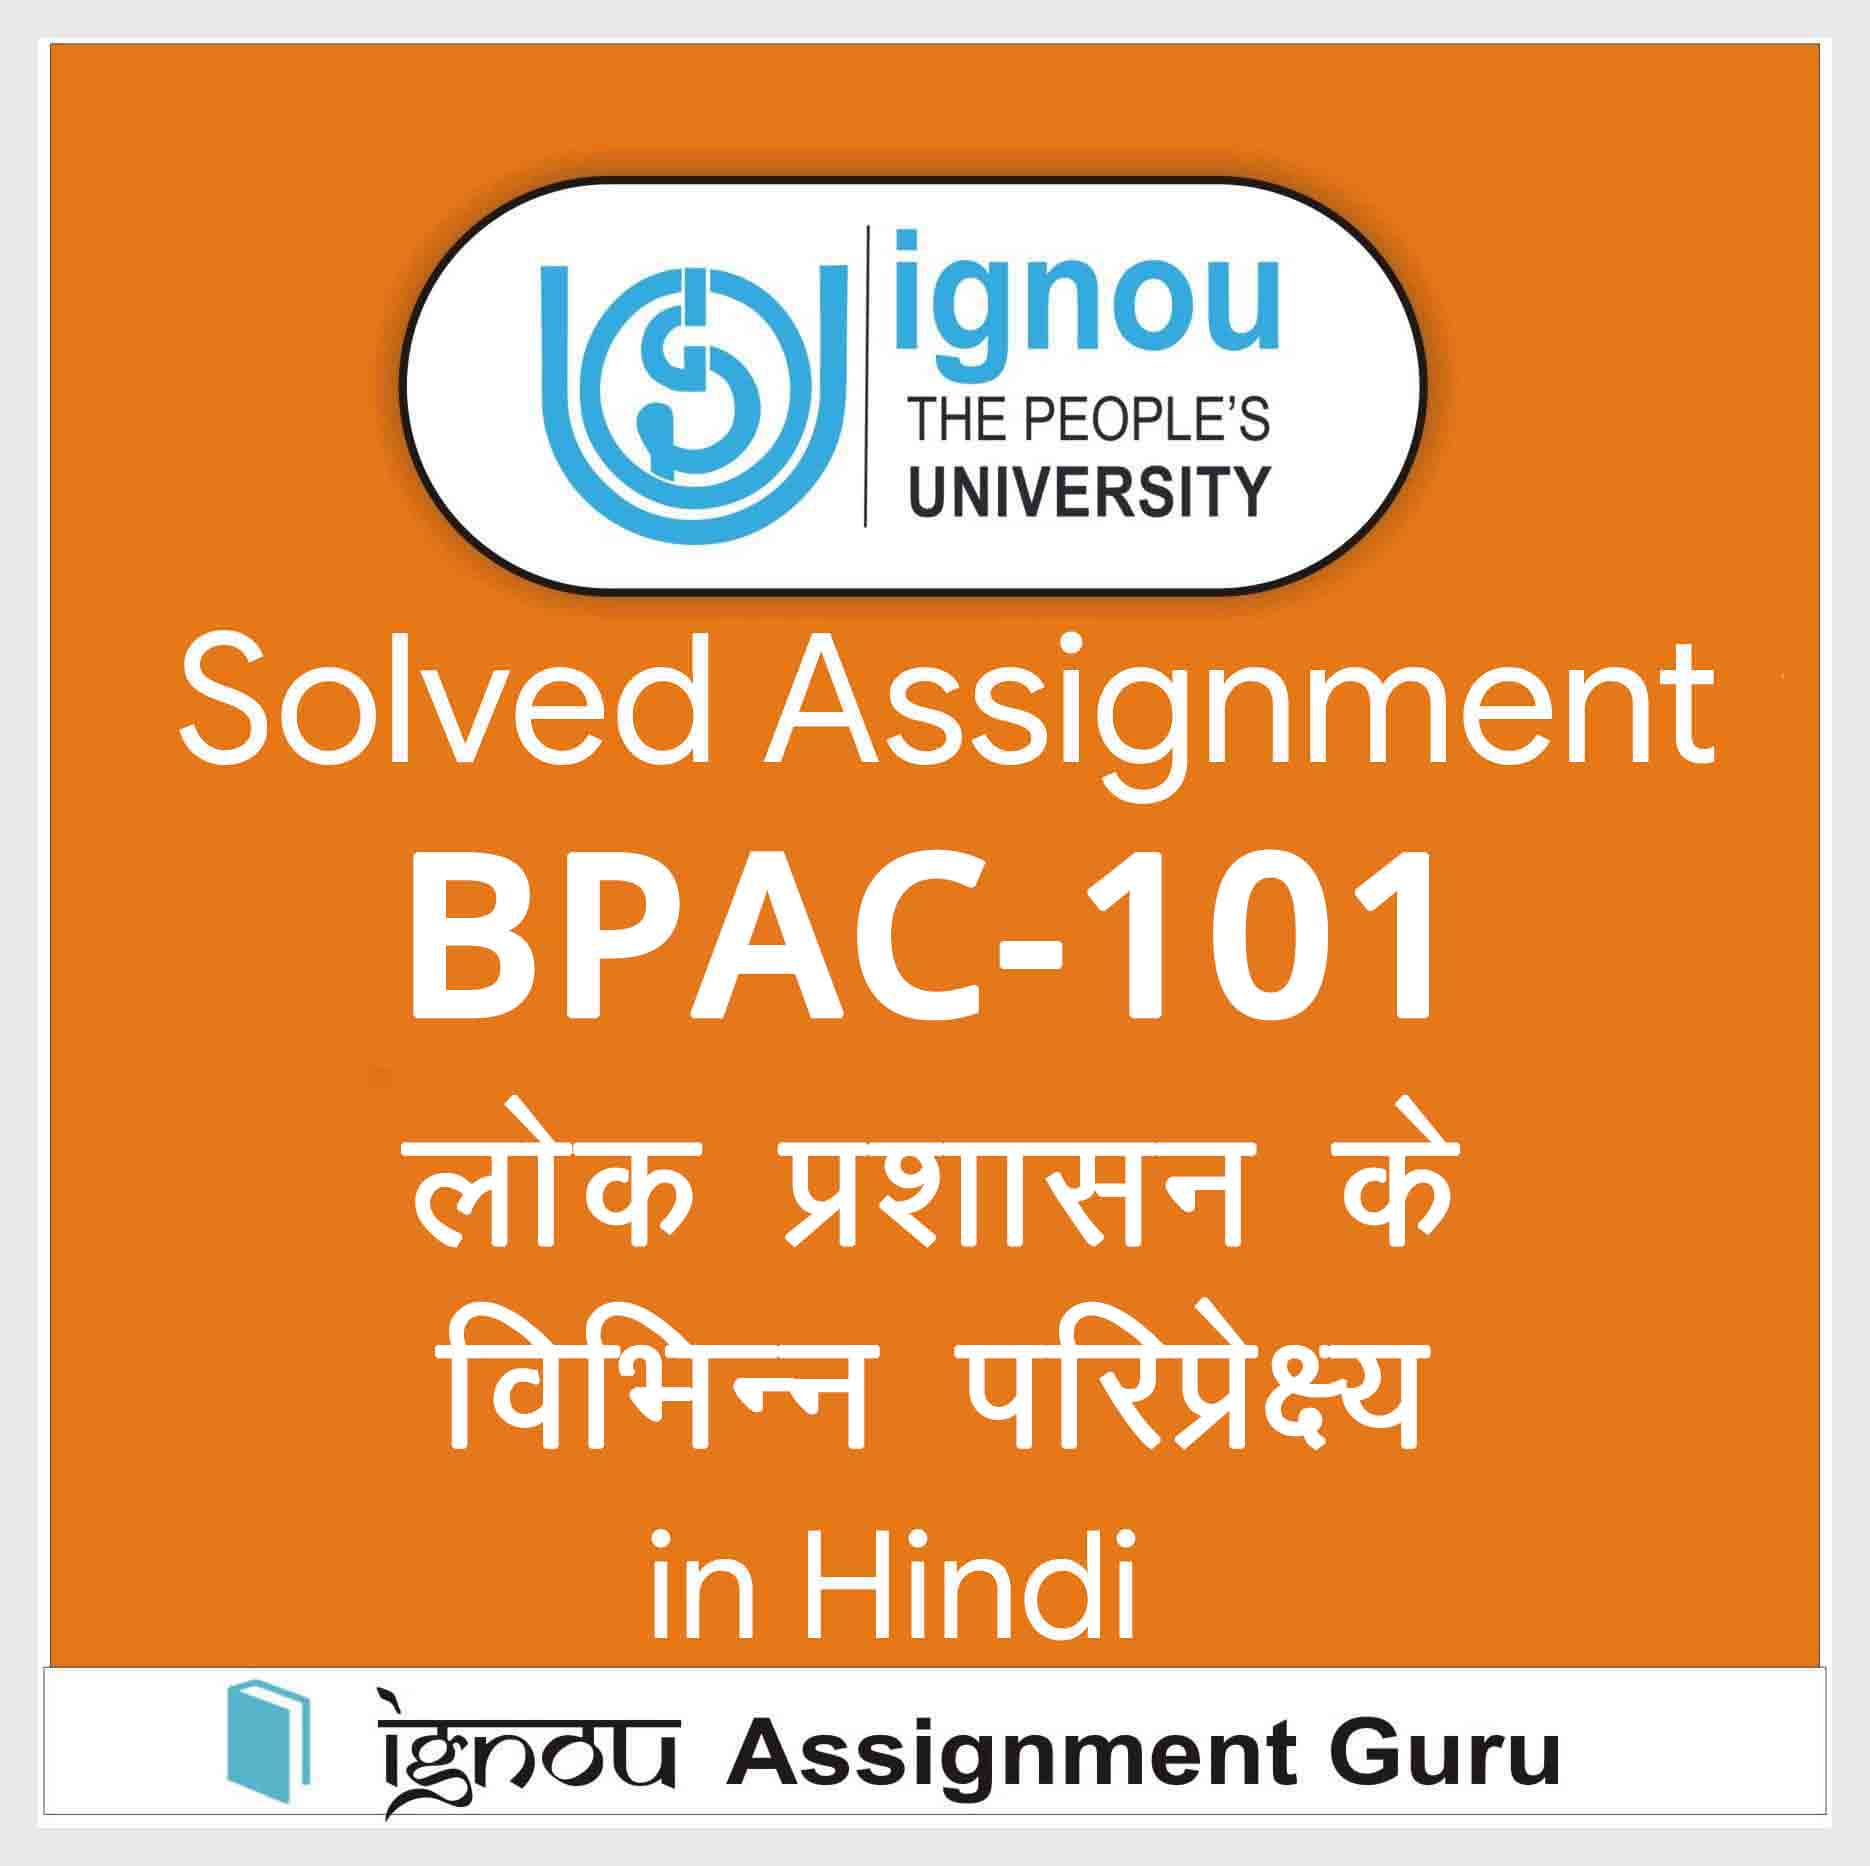 ignou bsoc 131 solved assignment in hindi